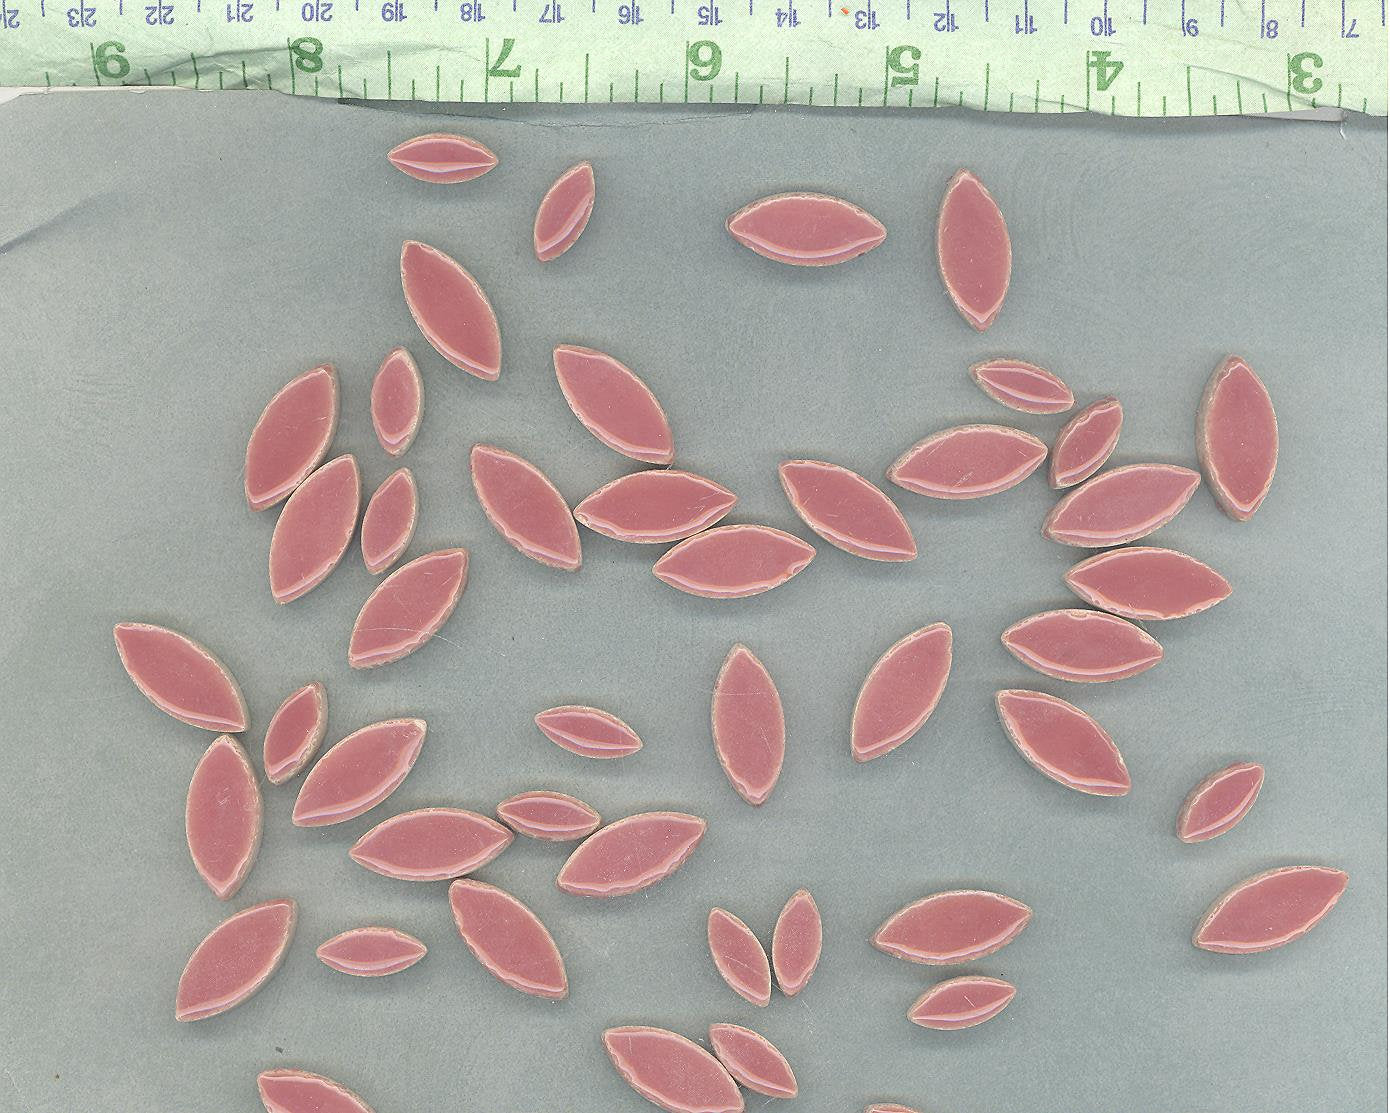 Dusty Rose Petals Mosaic Tiles - 50g Ceramic Leaves in Mix of 2 Sizes 1/2" and 3/4" - Deep Pink